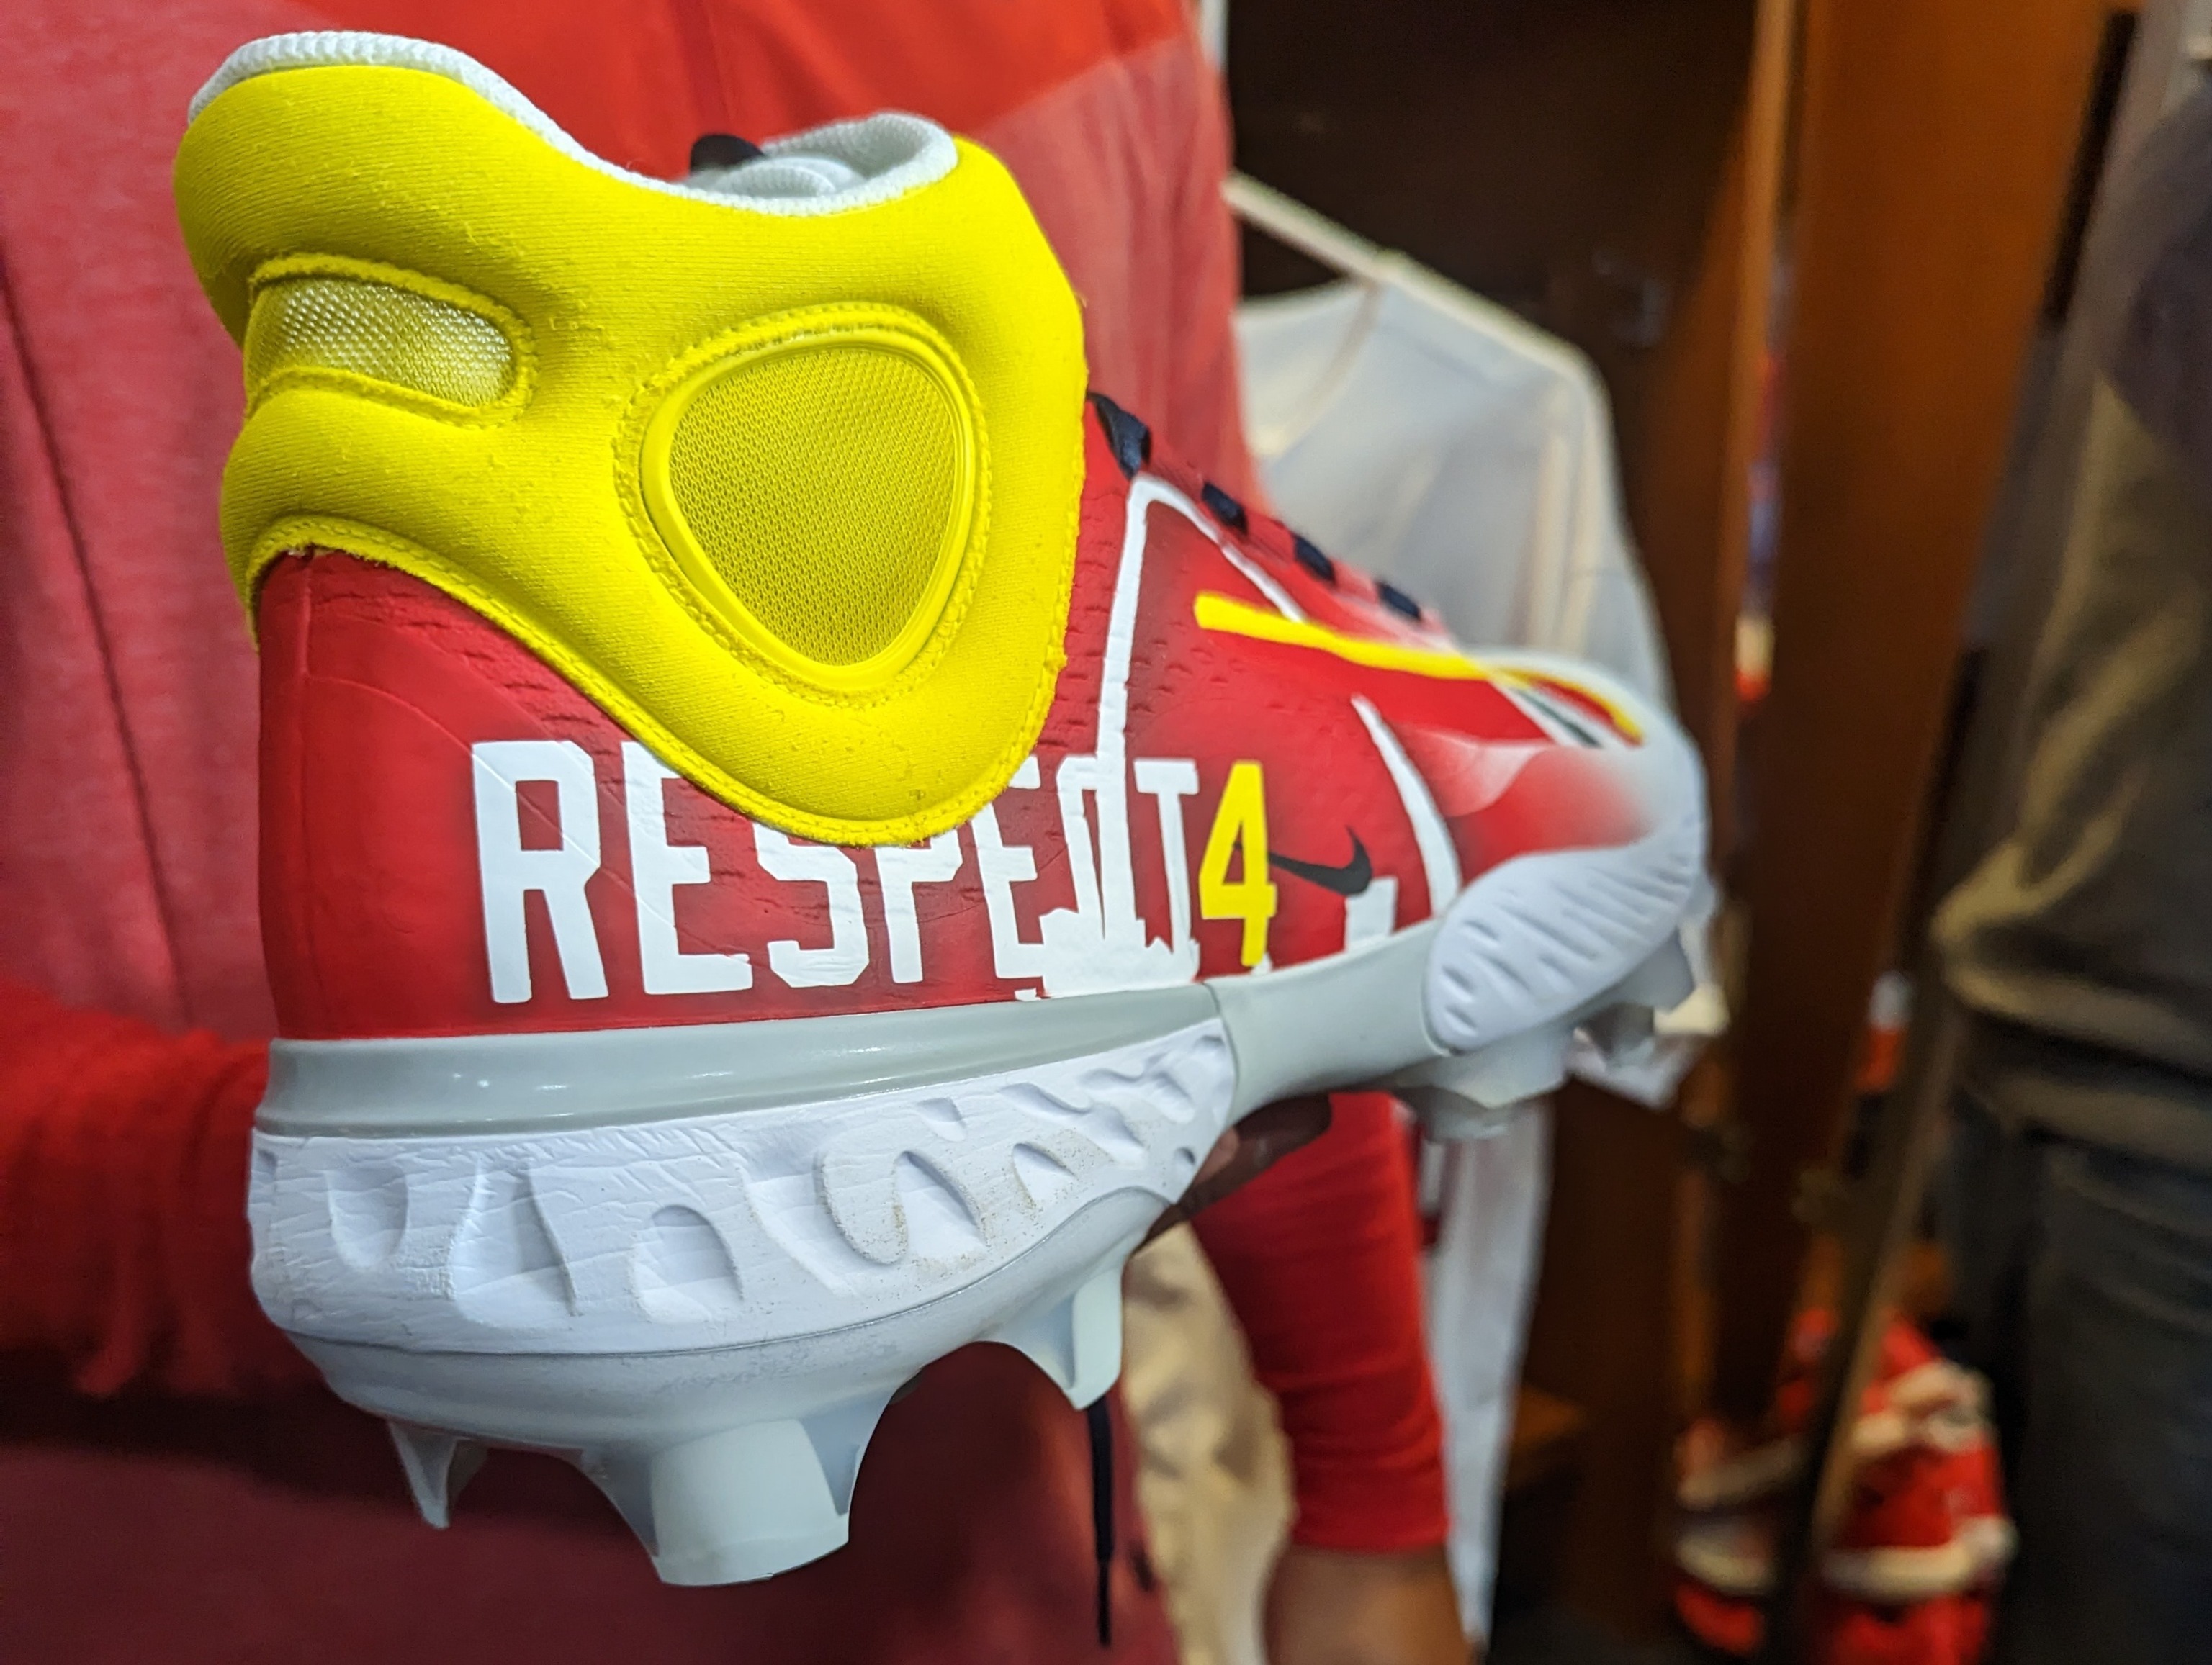 In his footsteps: Cardinals' Contreras honors Yadi with special cleats for  opening day